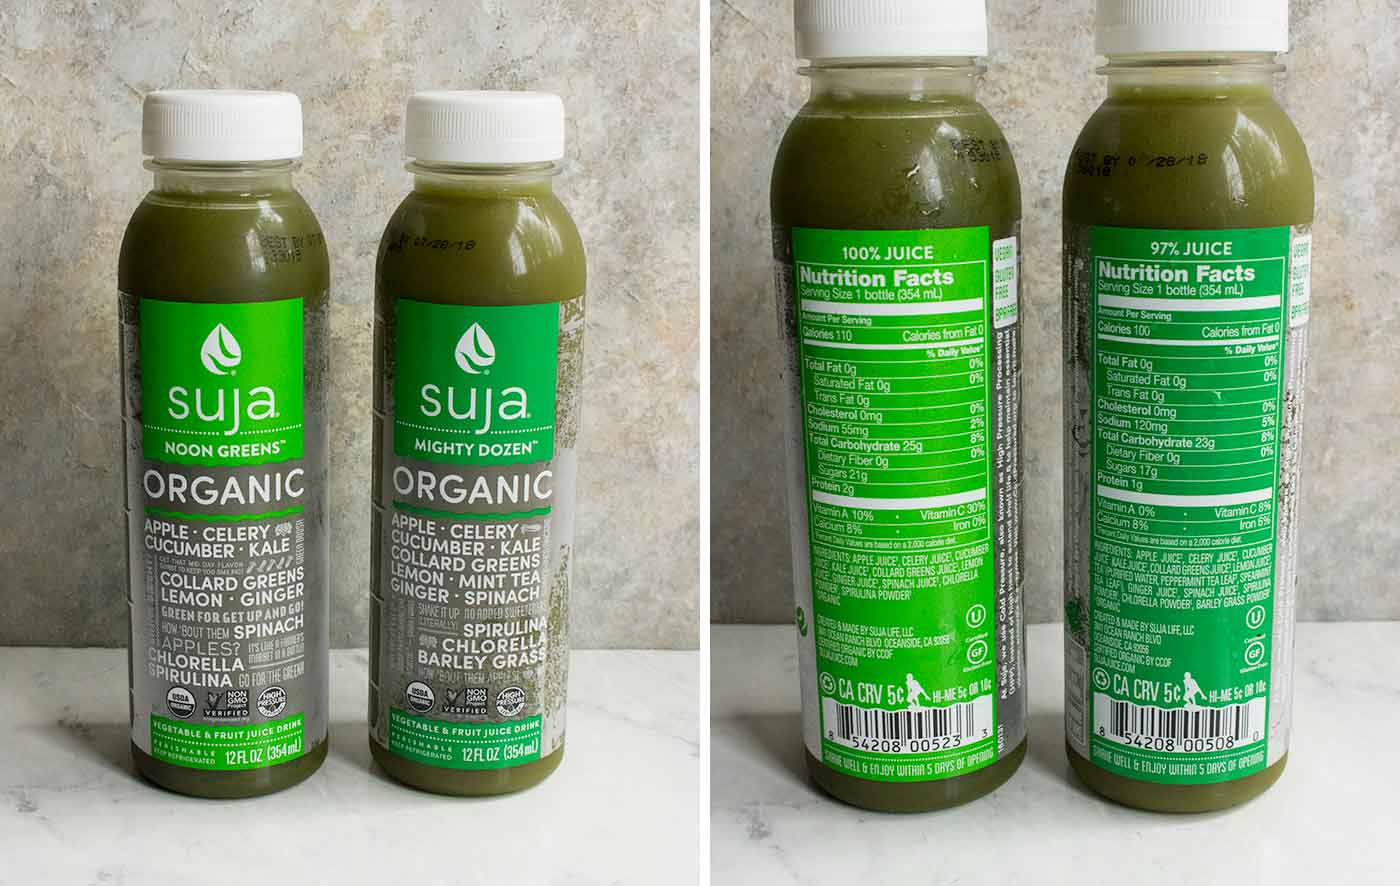 Suja green juice, available at many retailers